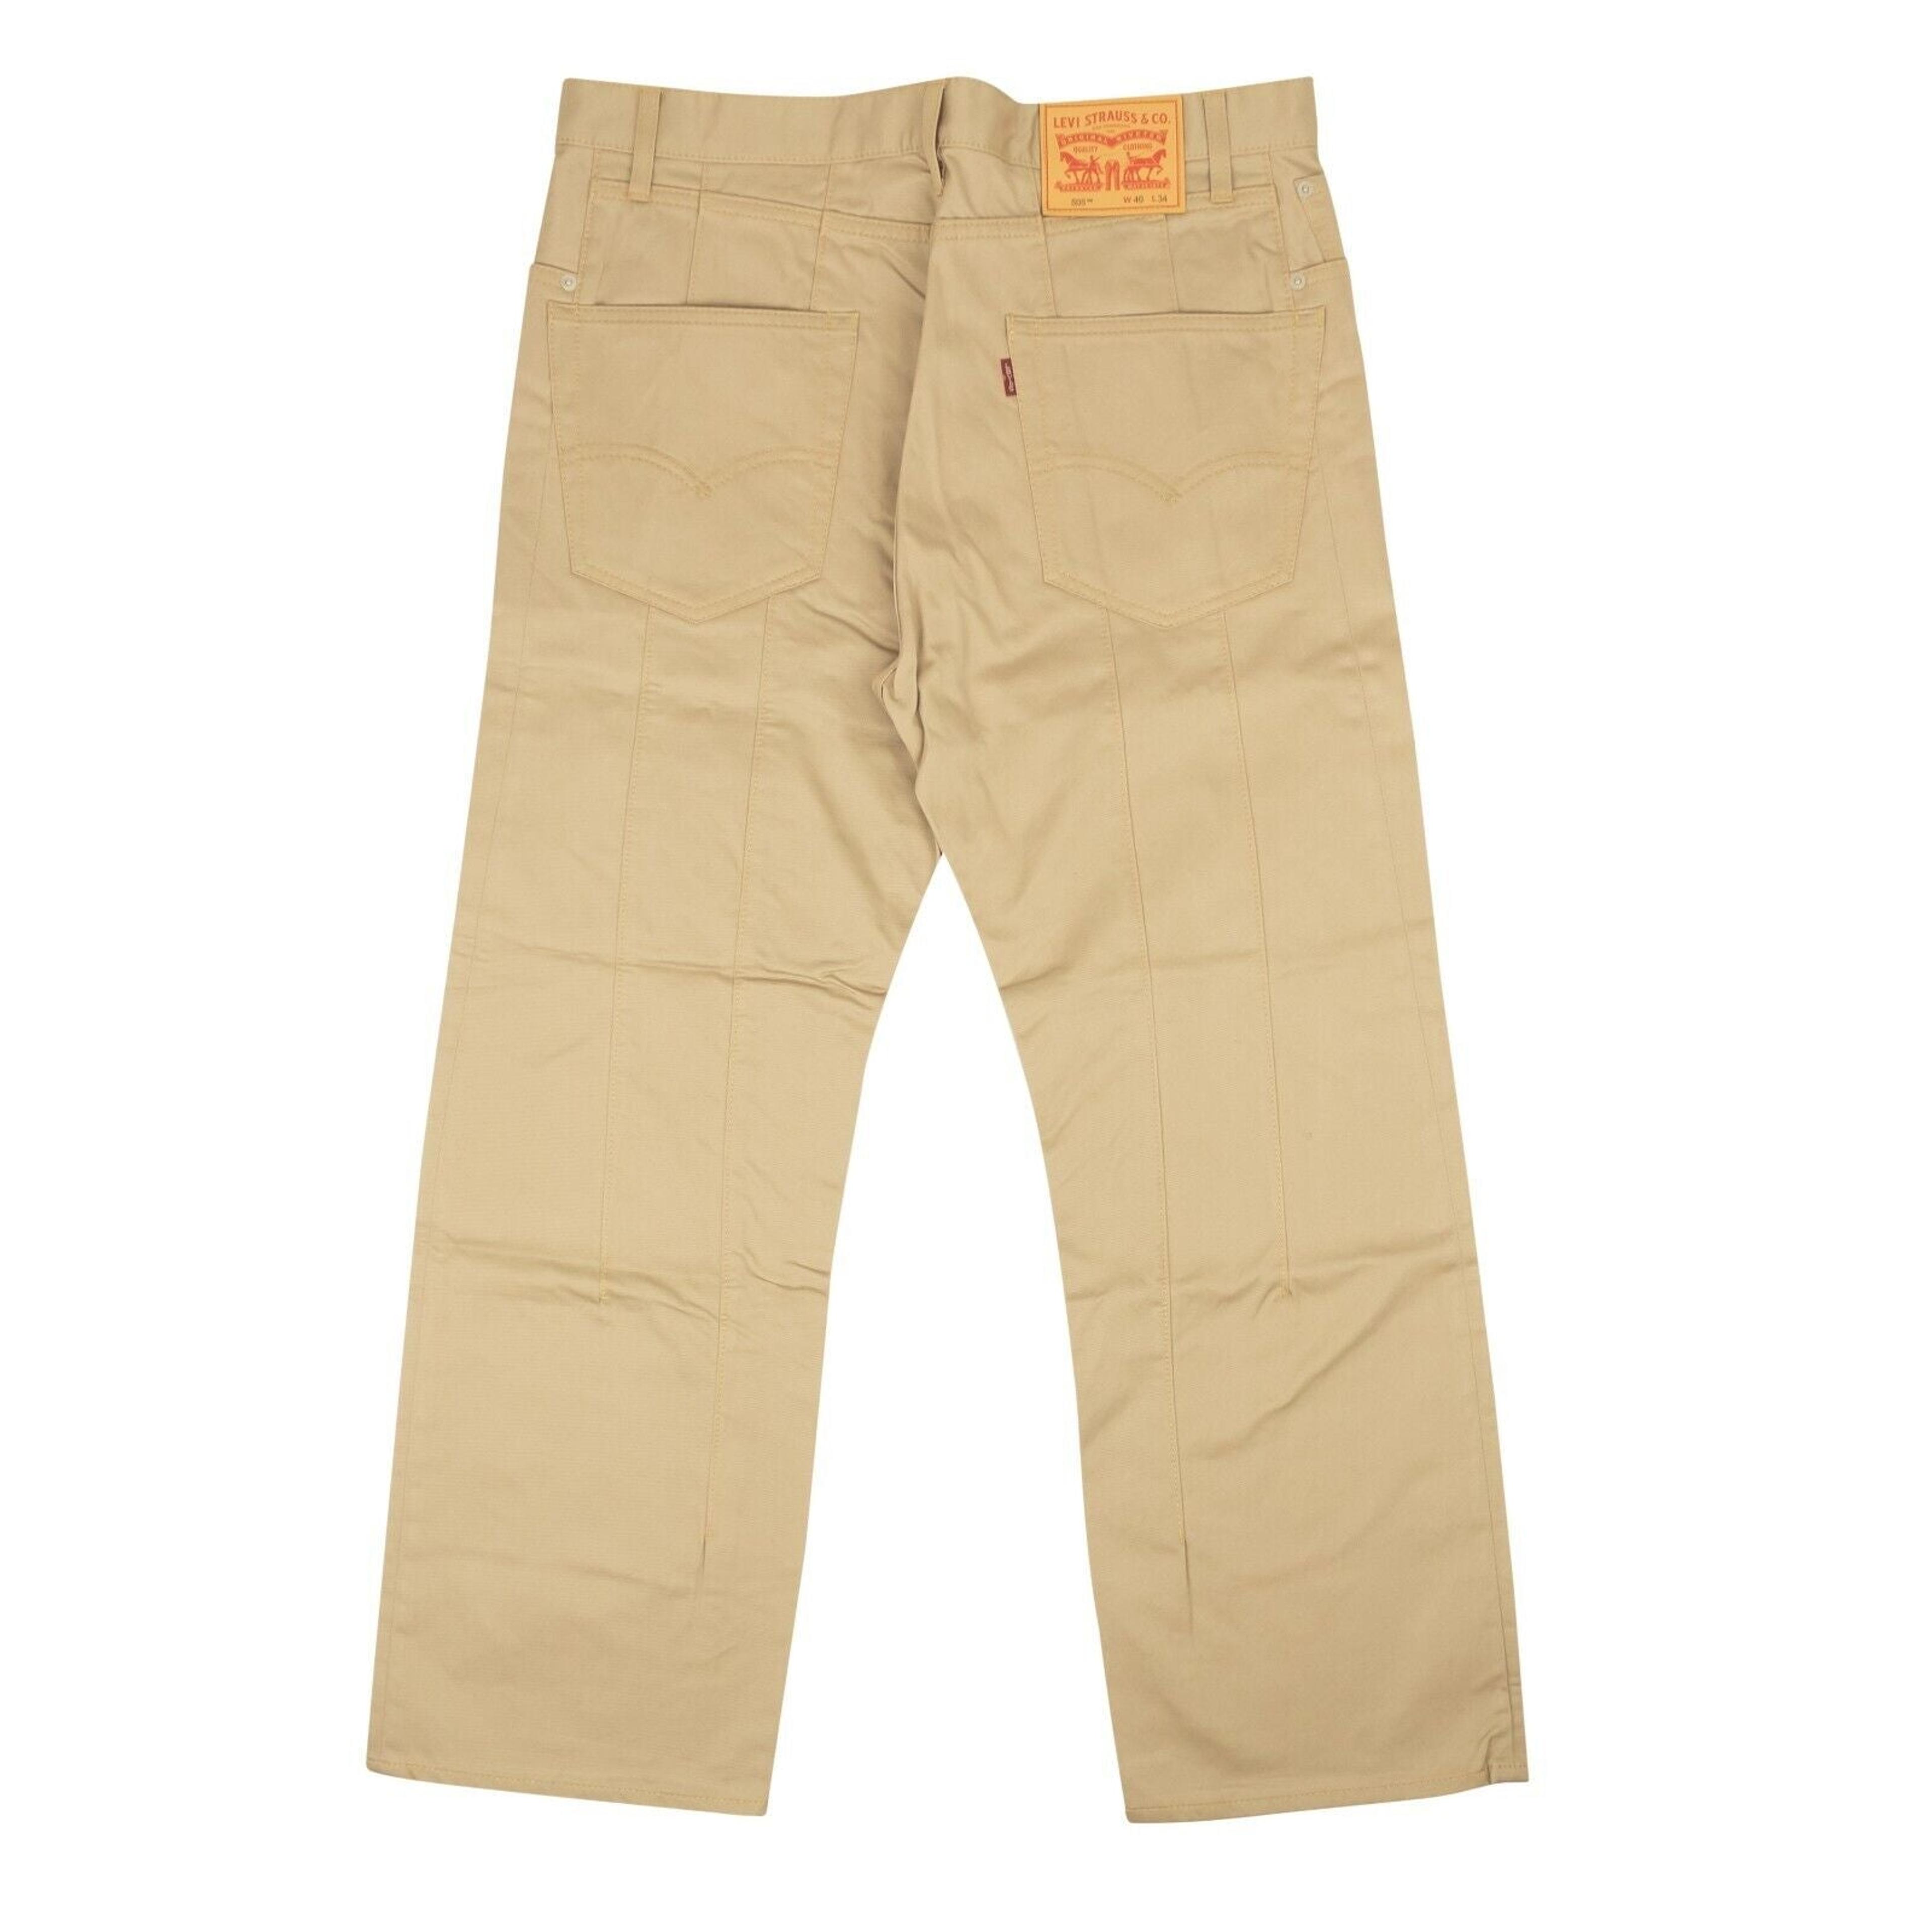 Alternate View 2 of x Levis Beige Cotton Chino Pants